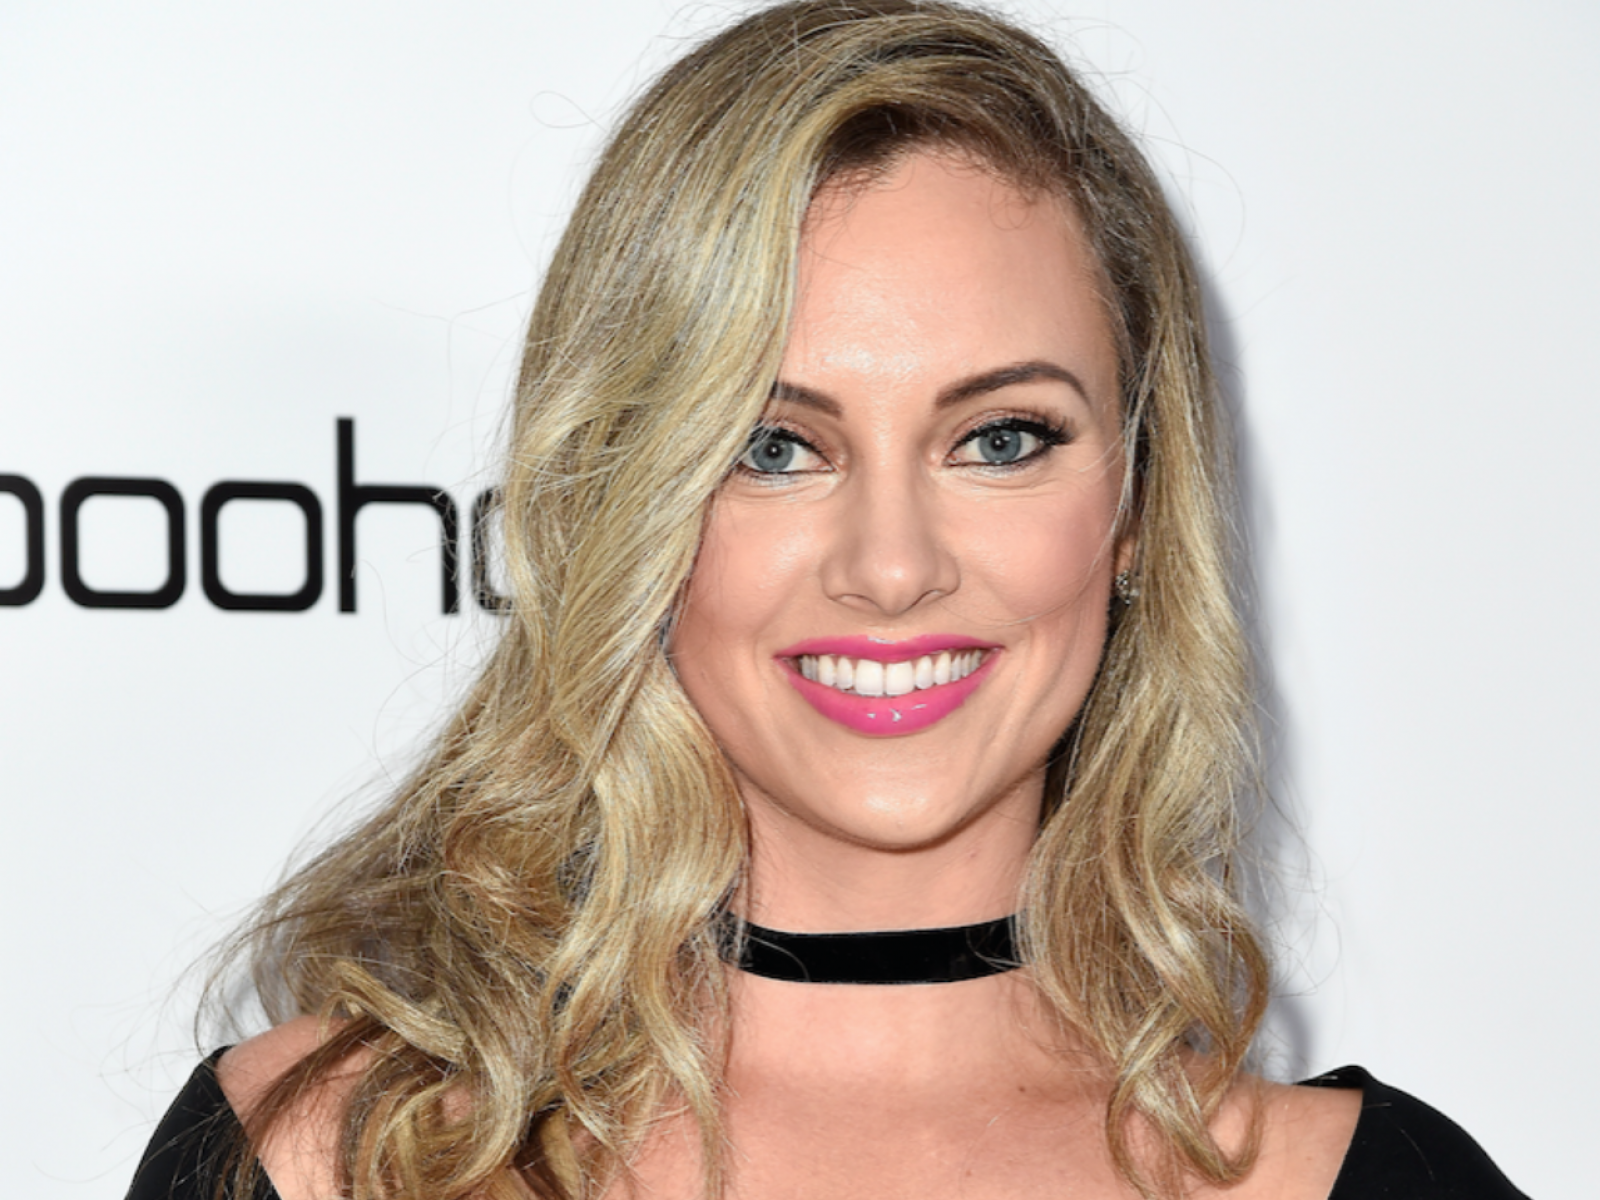 The 37-year old daughter of father (?) and mother(?) Nicole Arbour in 2022 photo. Nicole Arbour earned a  million dollar salary - leaving the net worth at  million in 2022